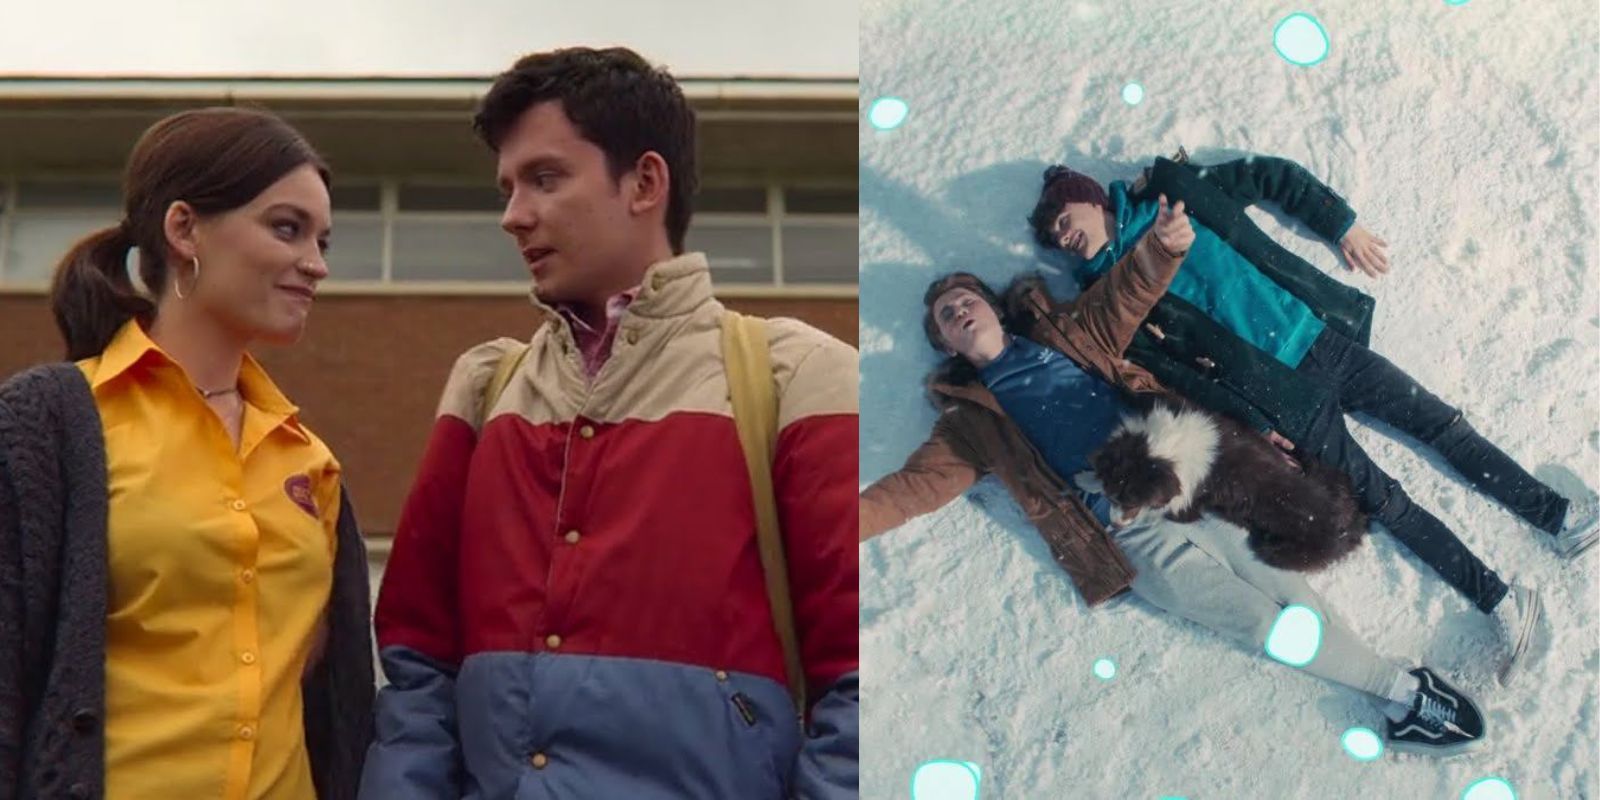 Maeve and Otis talking outside of school and charlie and nick lay in the snow